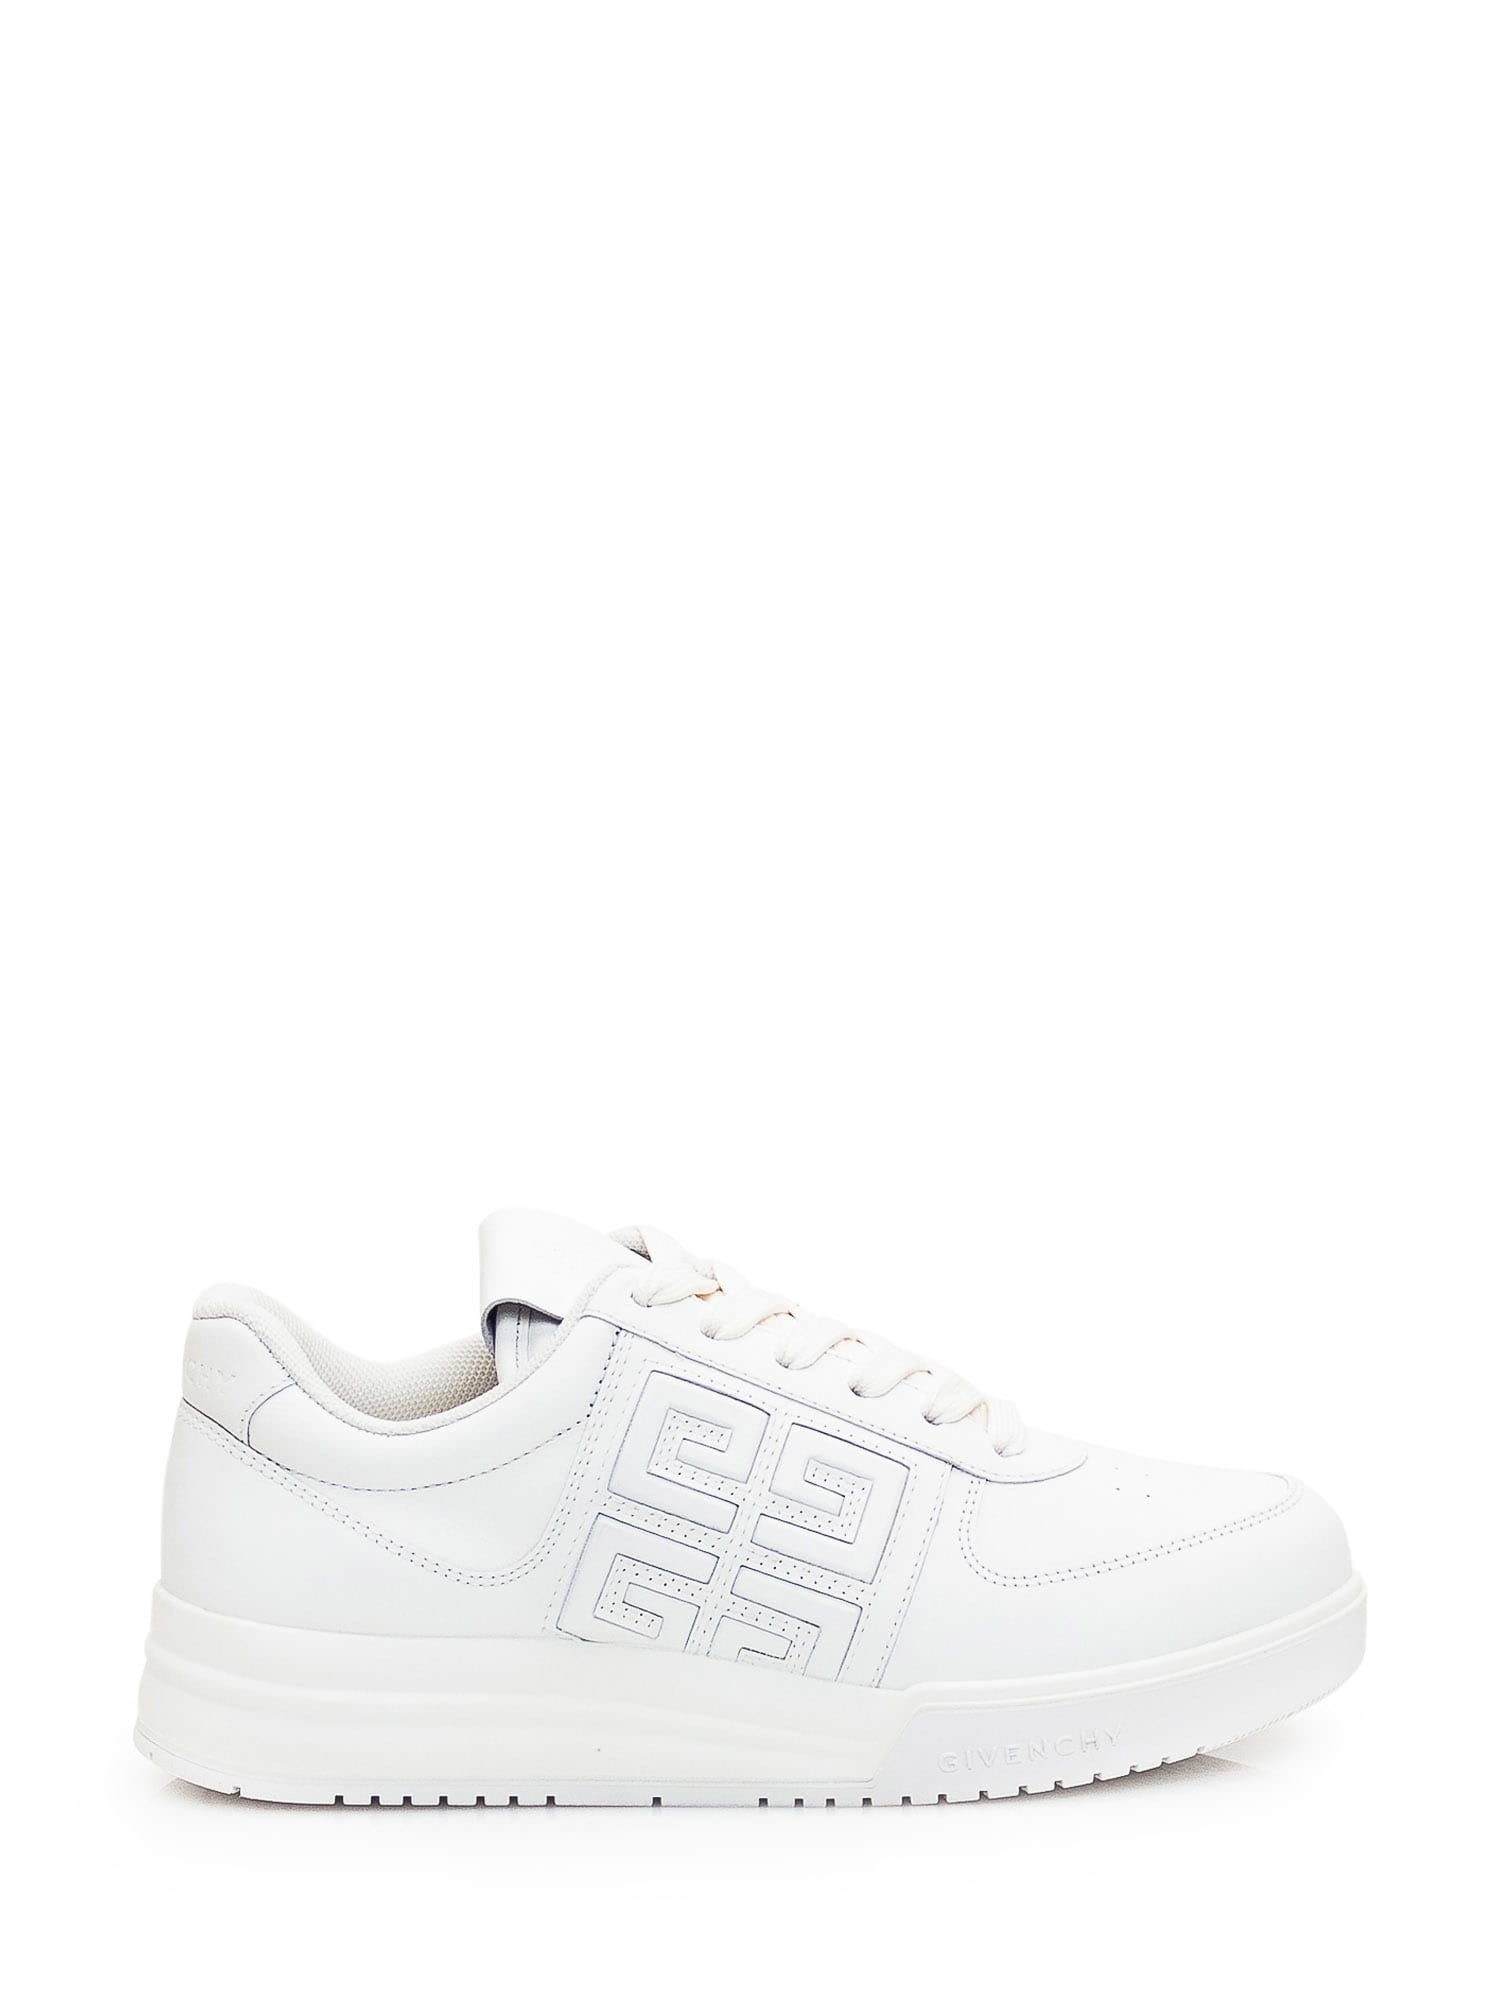 Givenchy G4 Sneaker In White